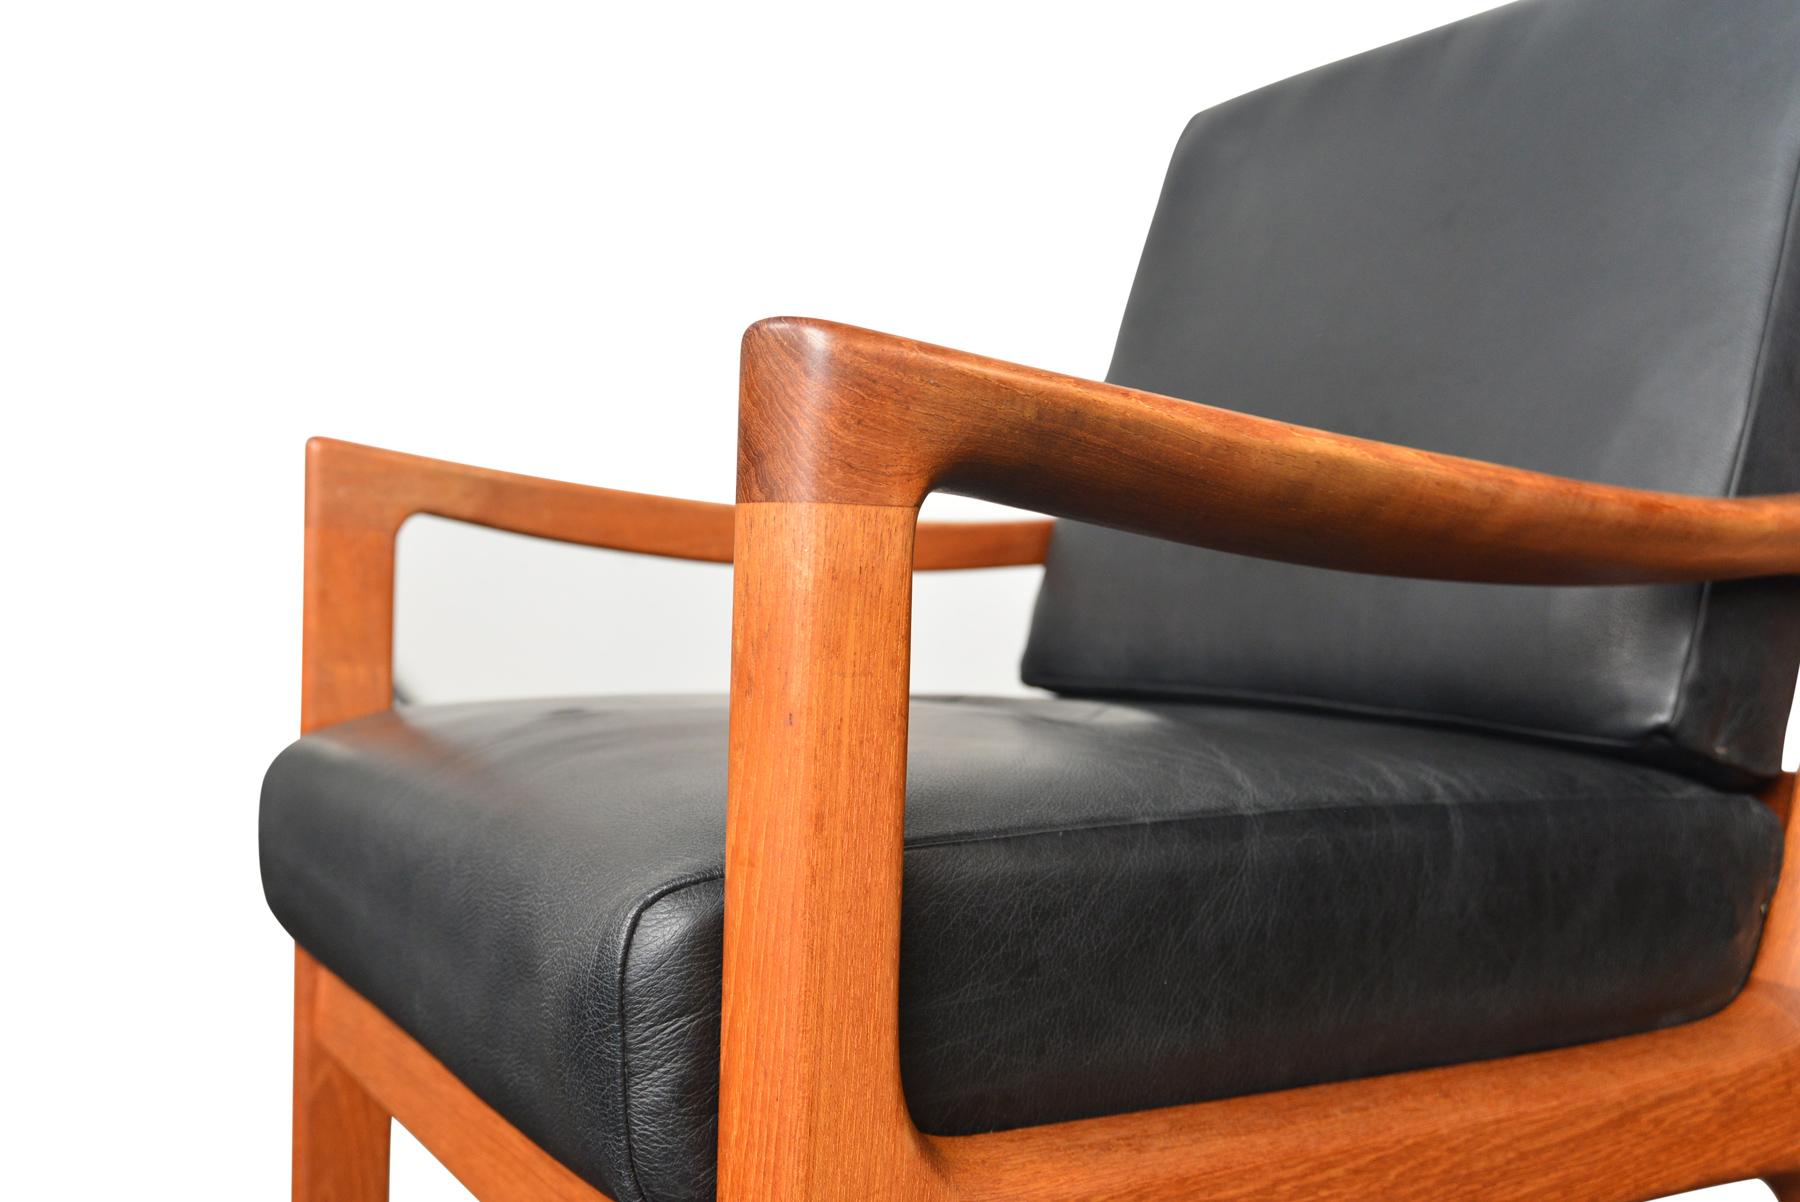 The timeless style of the Senator chairs by Ole Wanscher will add the warmth of vintage to any modern home. The chairs feature an exquisite blend of solid teak and sumptuous black leather. Enjoy the quality that only 65+ years of craftsmanship can